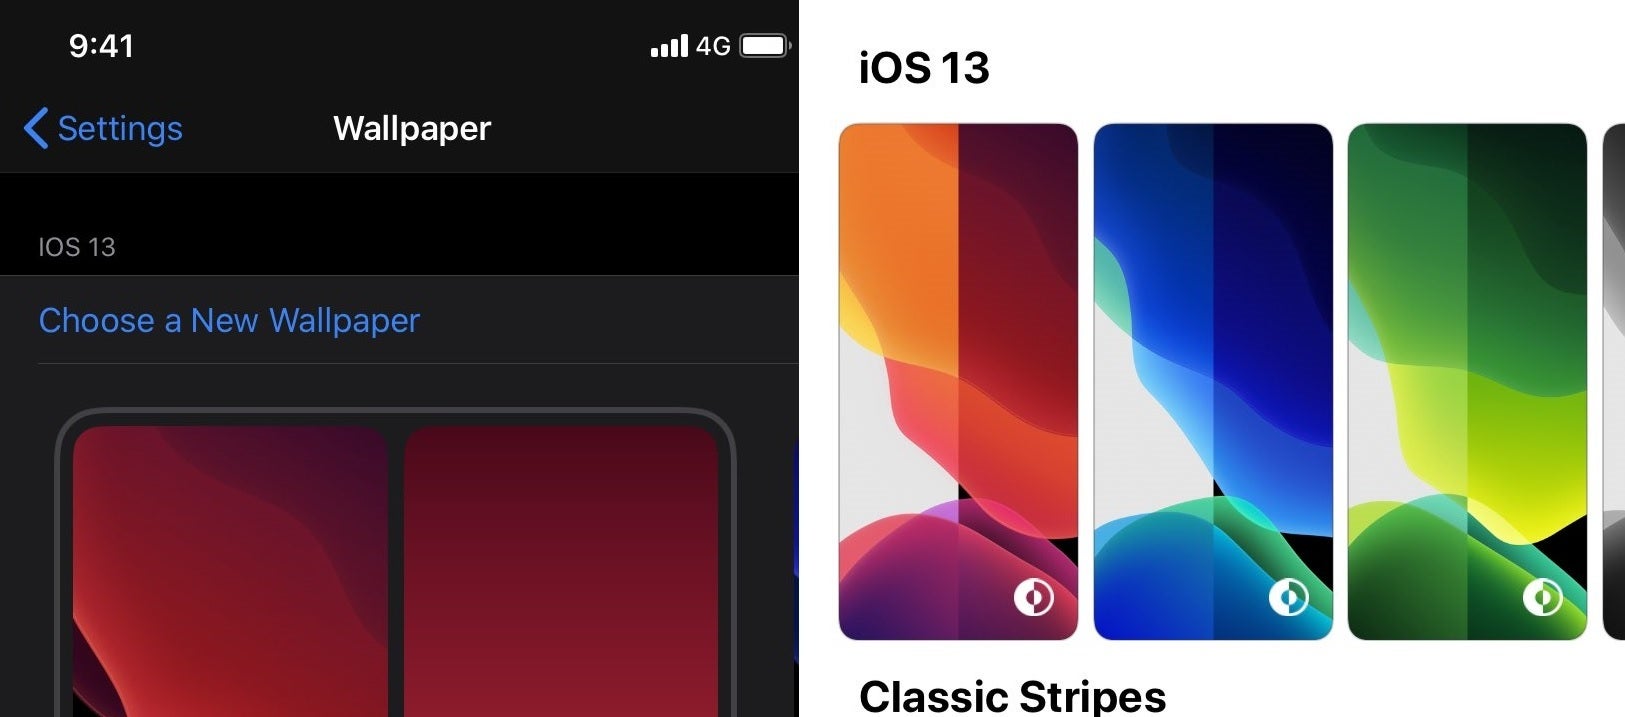 We could see more customization with iOS 14 - Leak reveals that iOS 14 will include Android features that iPhone users have long wanted